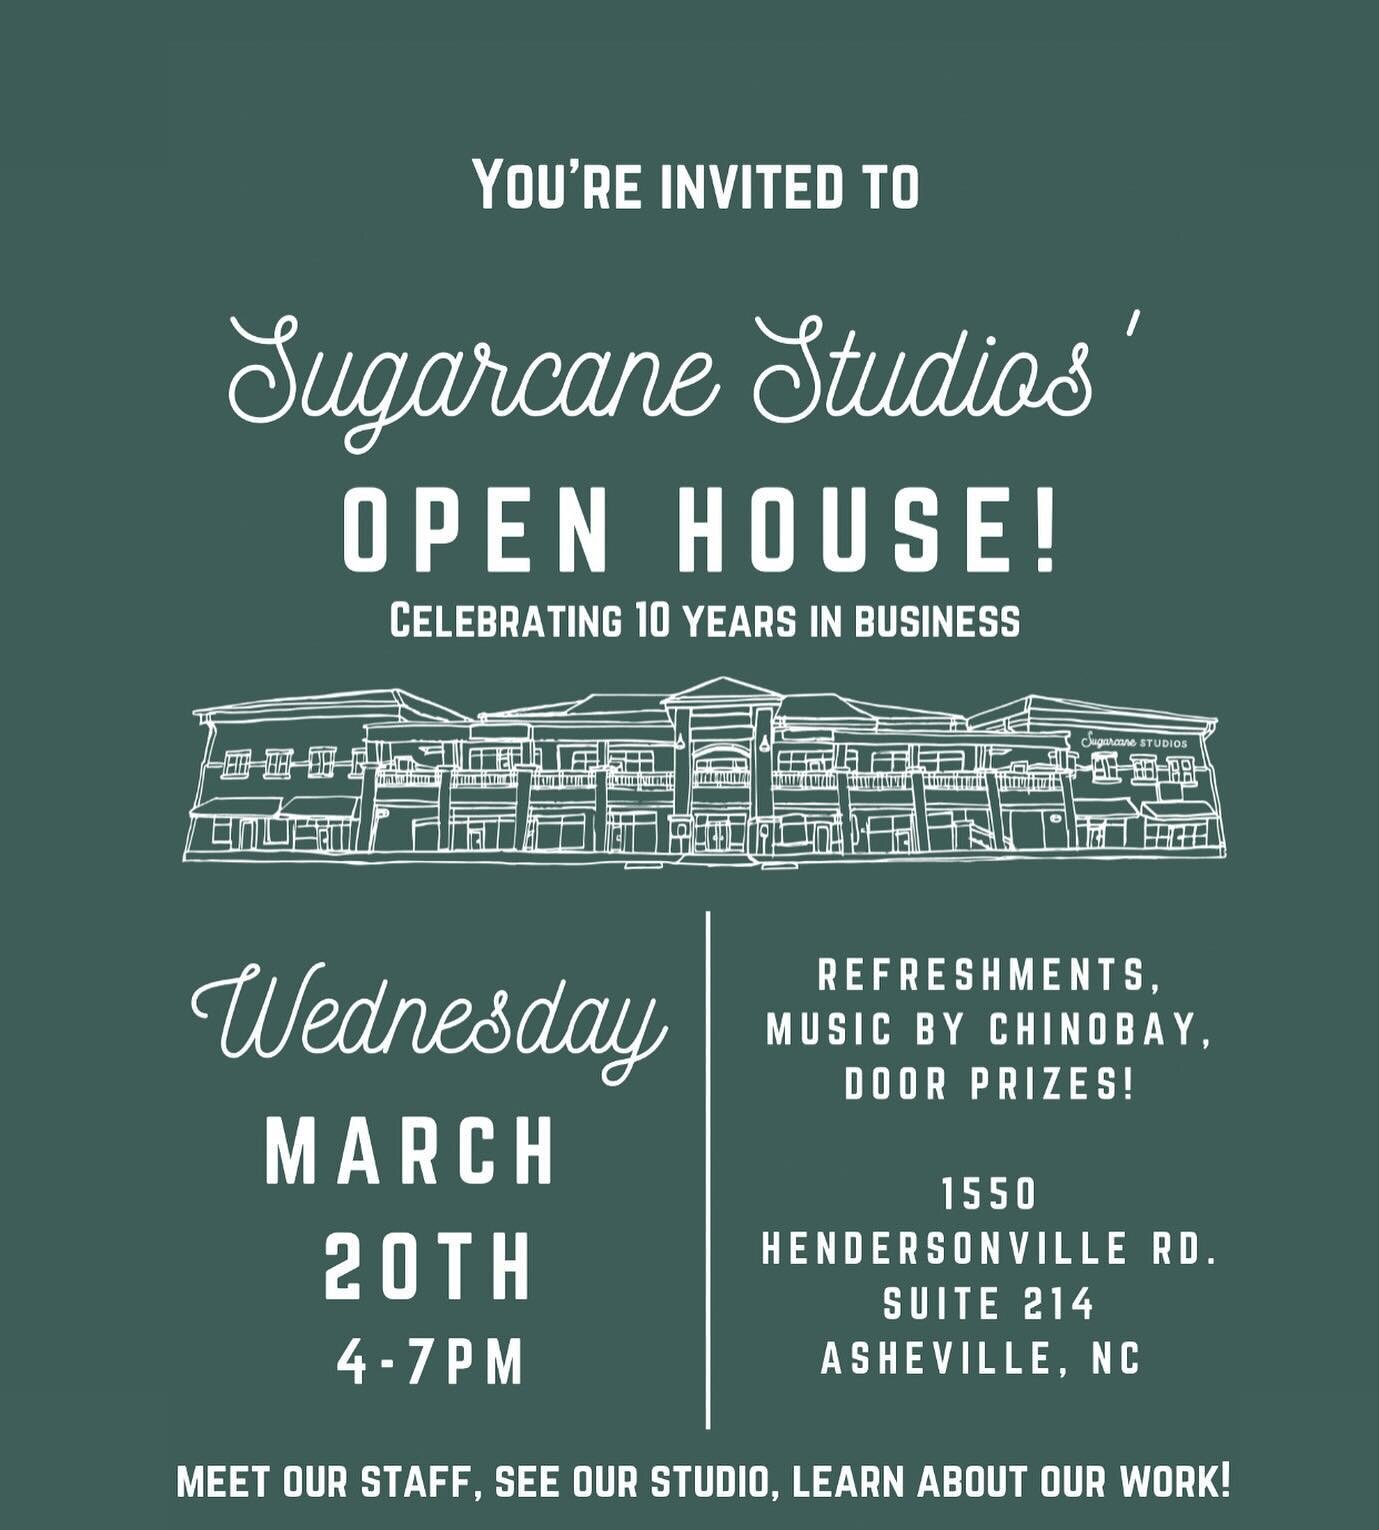 Join us at Sugarcane Studios as we celebrate 10 years in business! 🎉 Save the date for our open house on Wednesday, March 20th. Enjoy refreshments from @chemistspirits and  @tablewineasheville music by @chinobayk , door prizes, and a chance to meet 